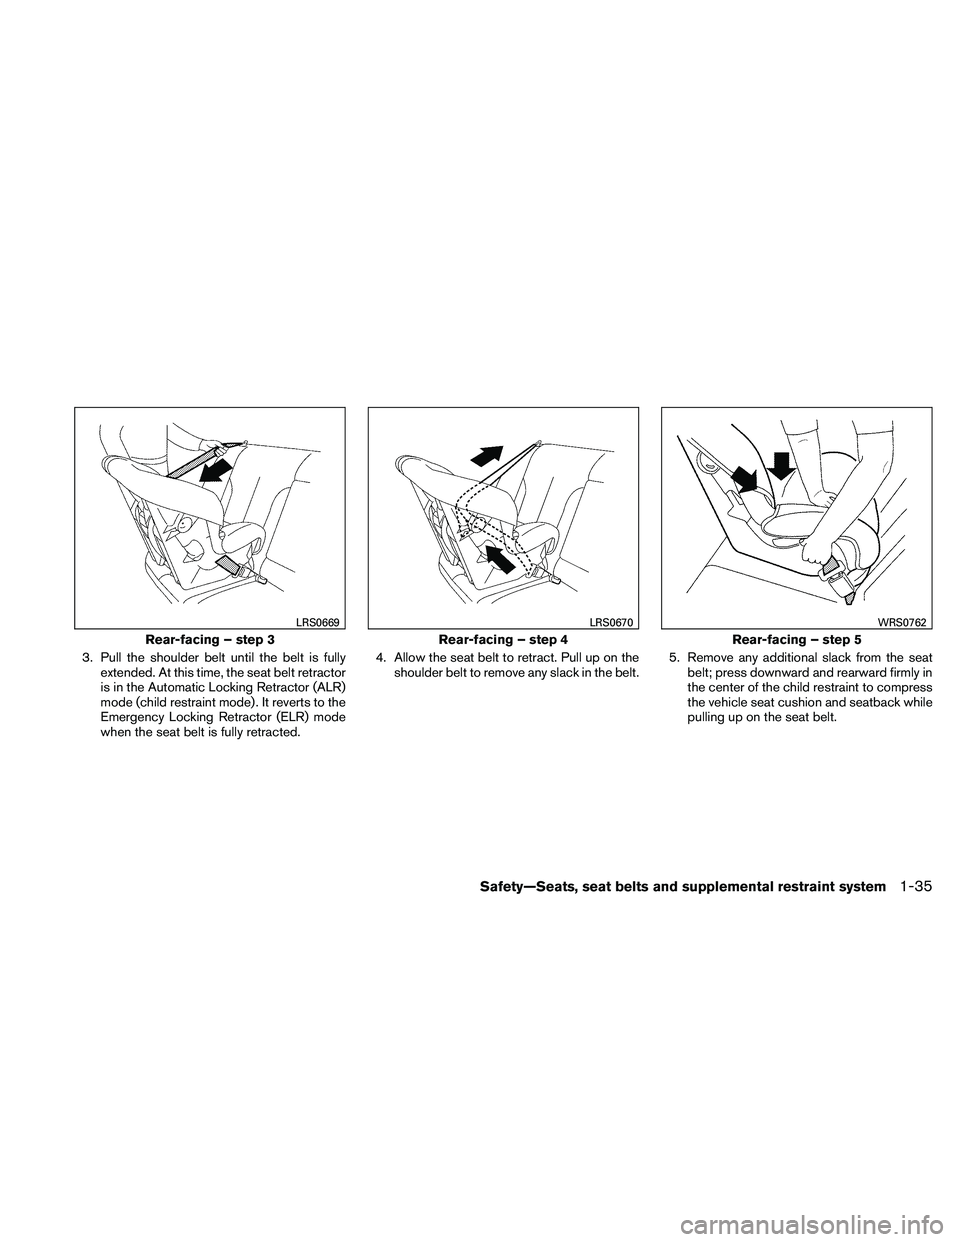 NISSAN XTERRA 2010  Owner´s Manual 3. Pull the shoulder belt until the belt is fullyextended. At this time, the seat belt retractor
is in the Automatic Locking Retractor (ALR)
mode (child restraint mode) . It reverts to the
Emergency L